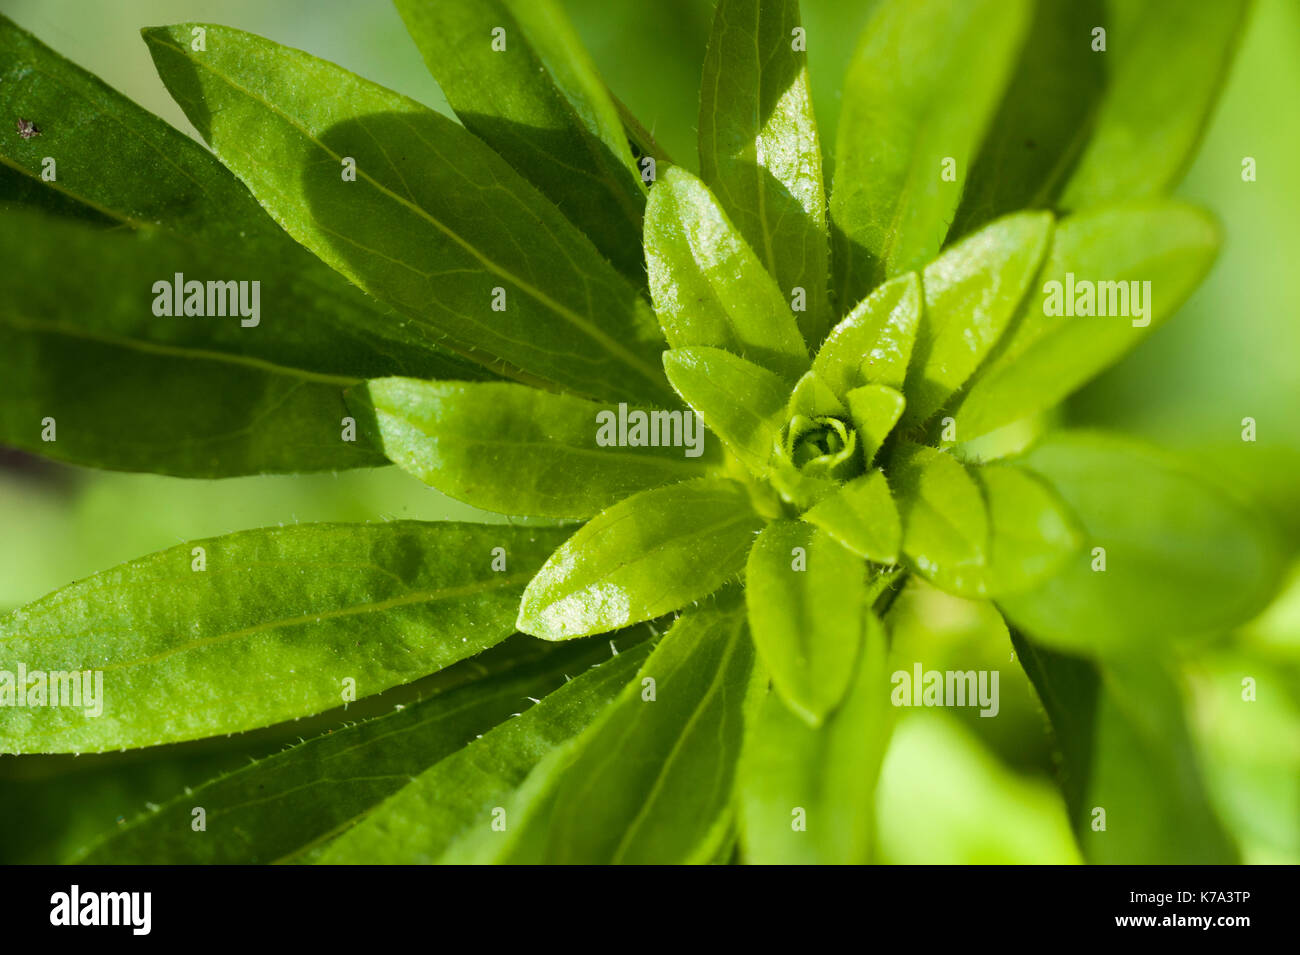 macro photo of a green plant, top view Stock Photo